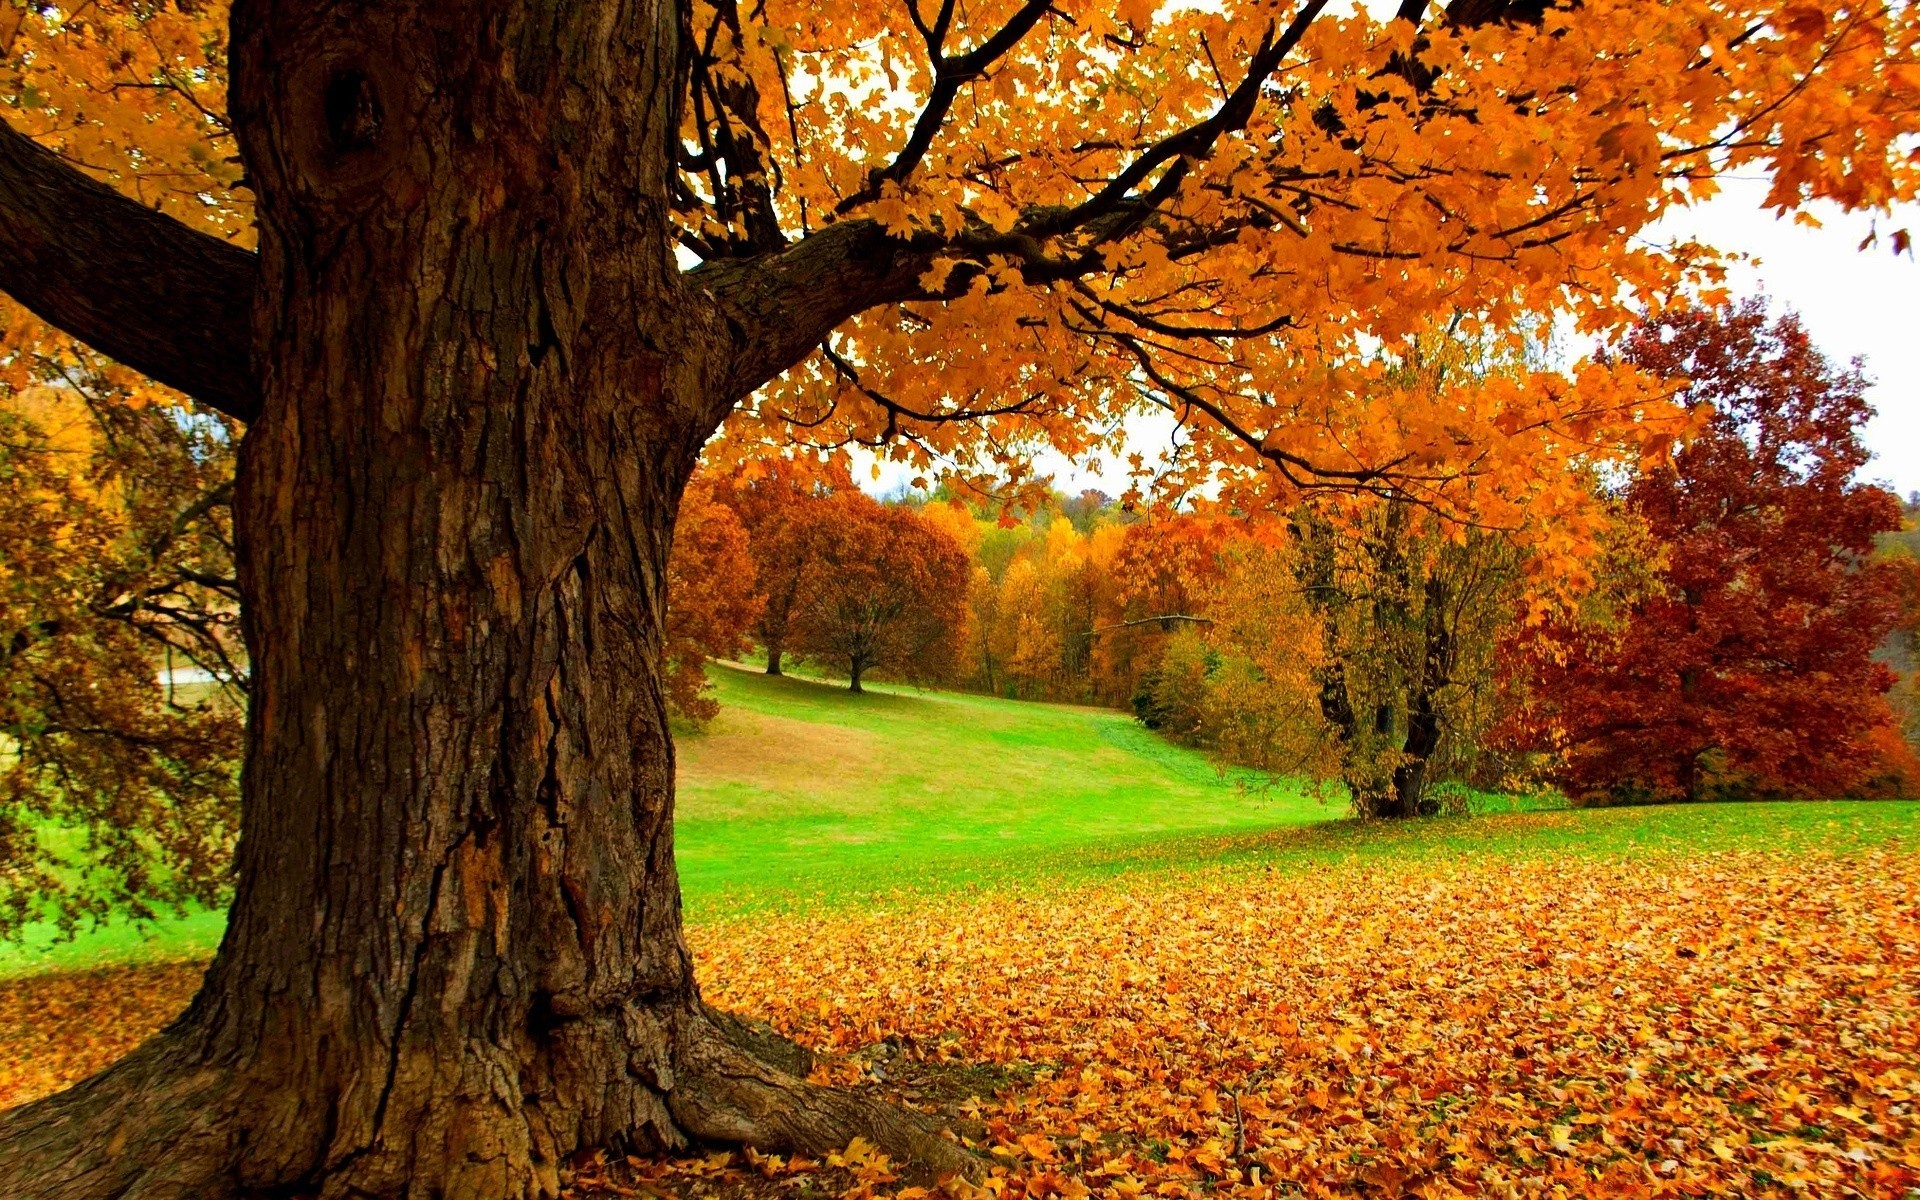 autumn fall tree leaf wood park nature season maple landscape outdoors gold fair weather bright scenic countryside